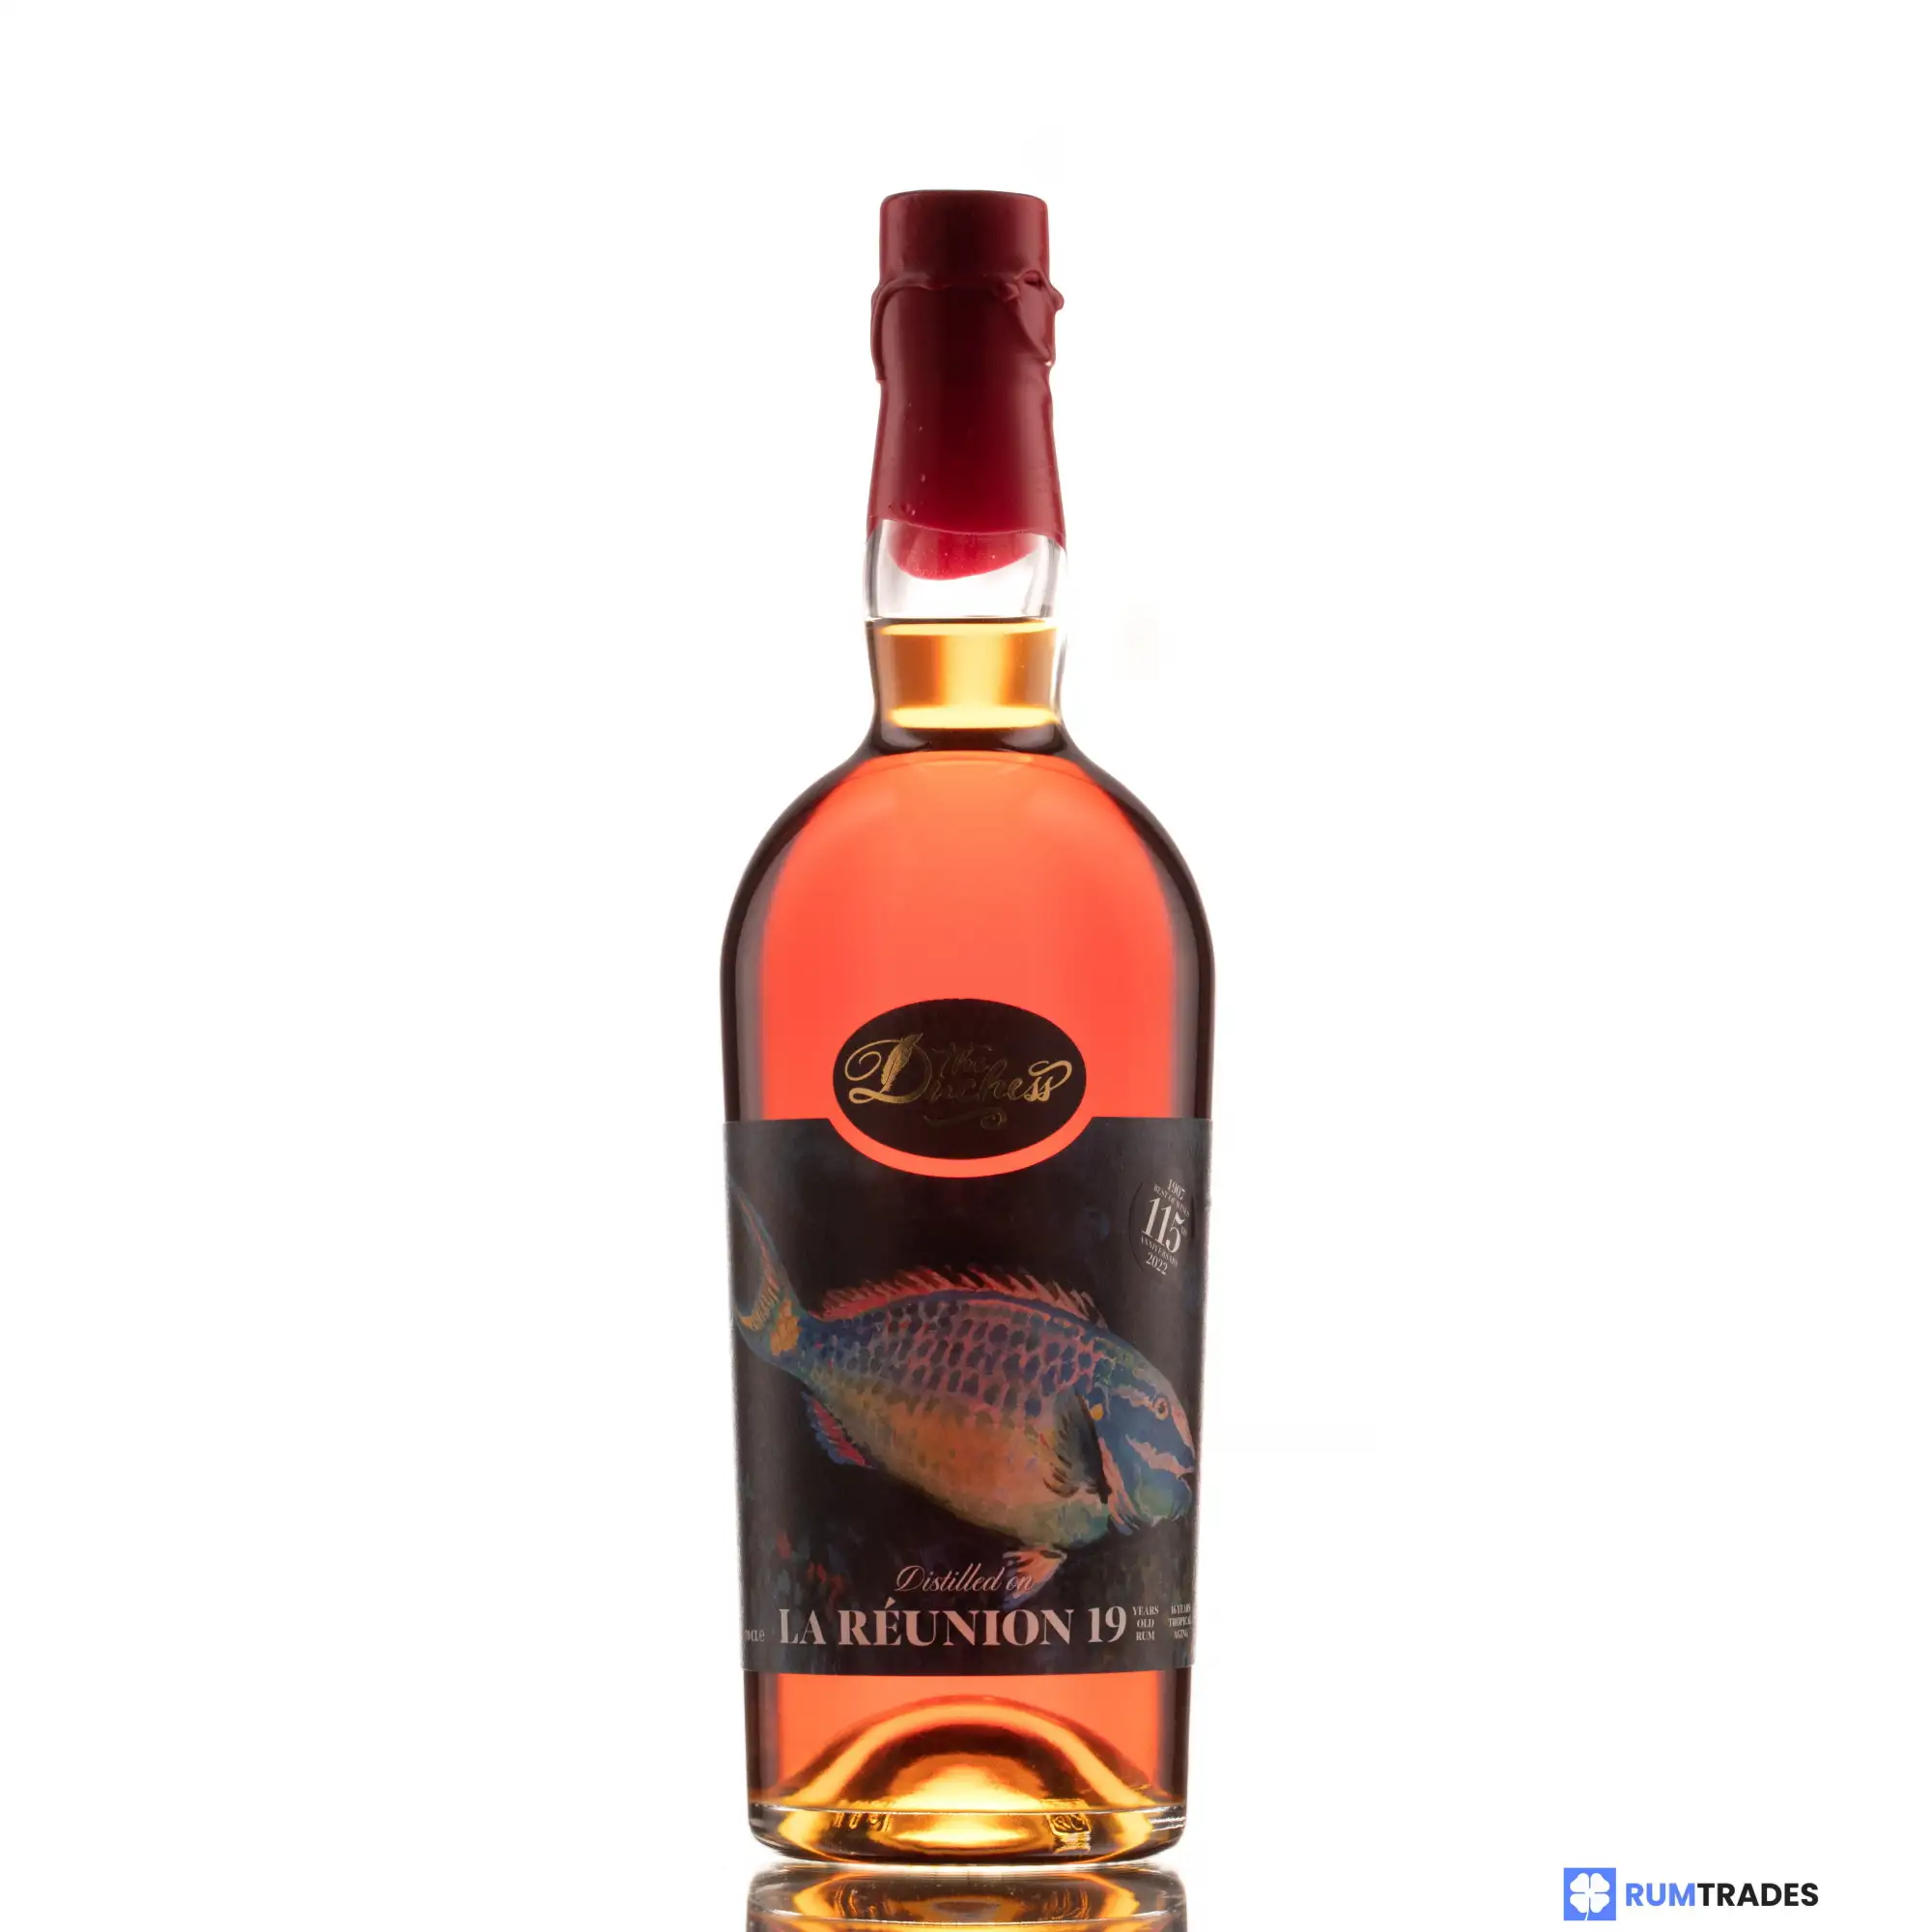 Image of the front of the bottle of the rum La Reunion 19